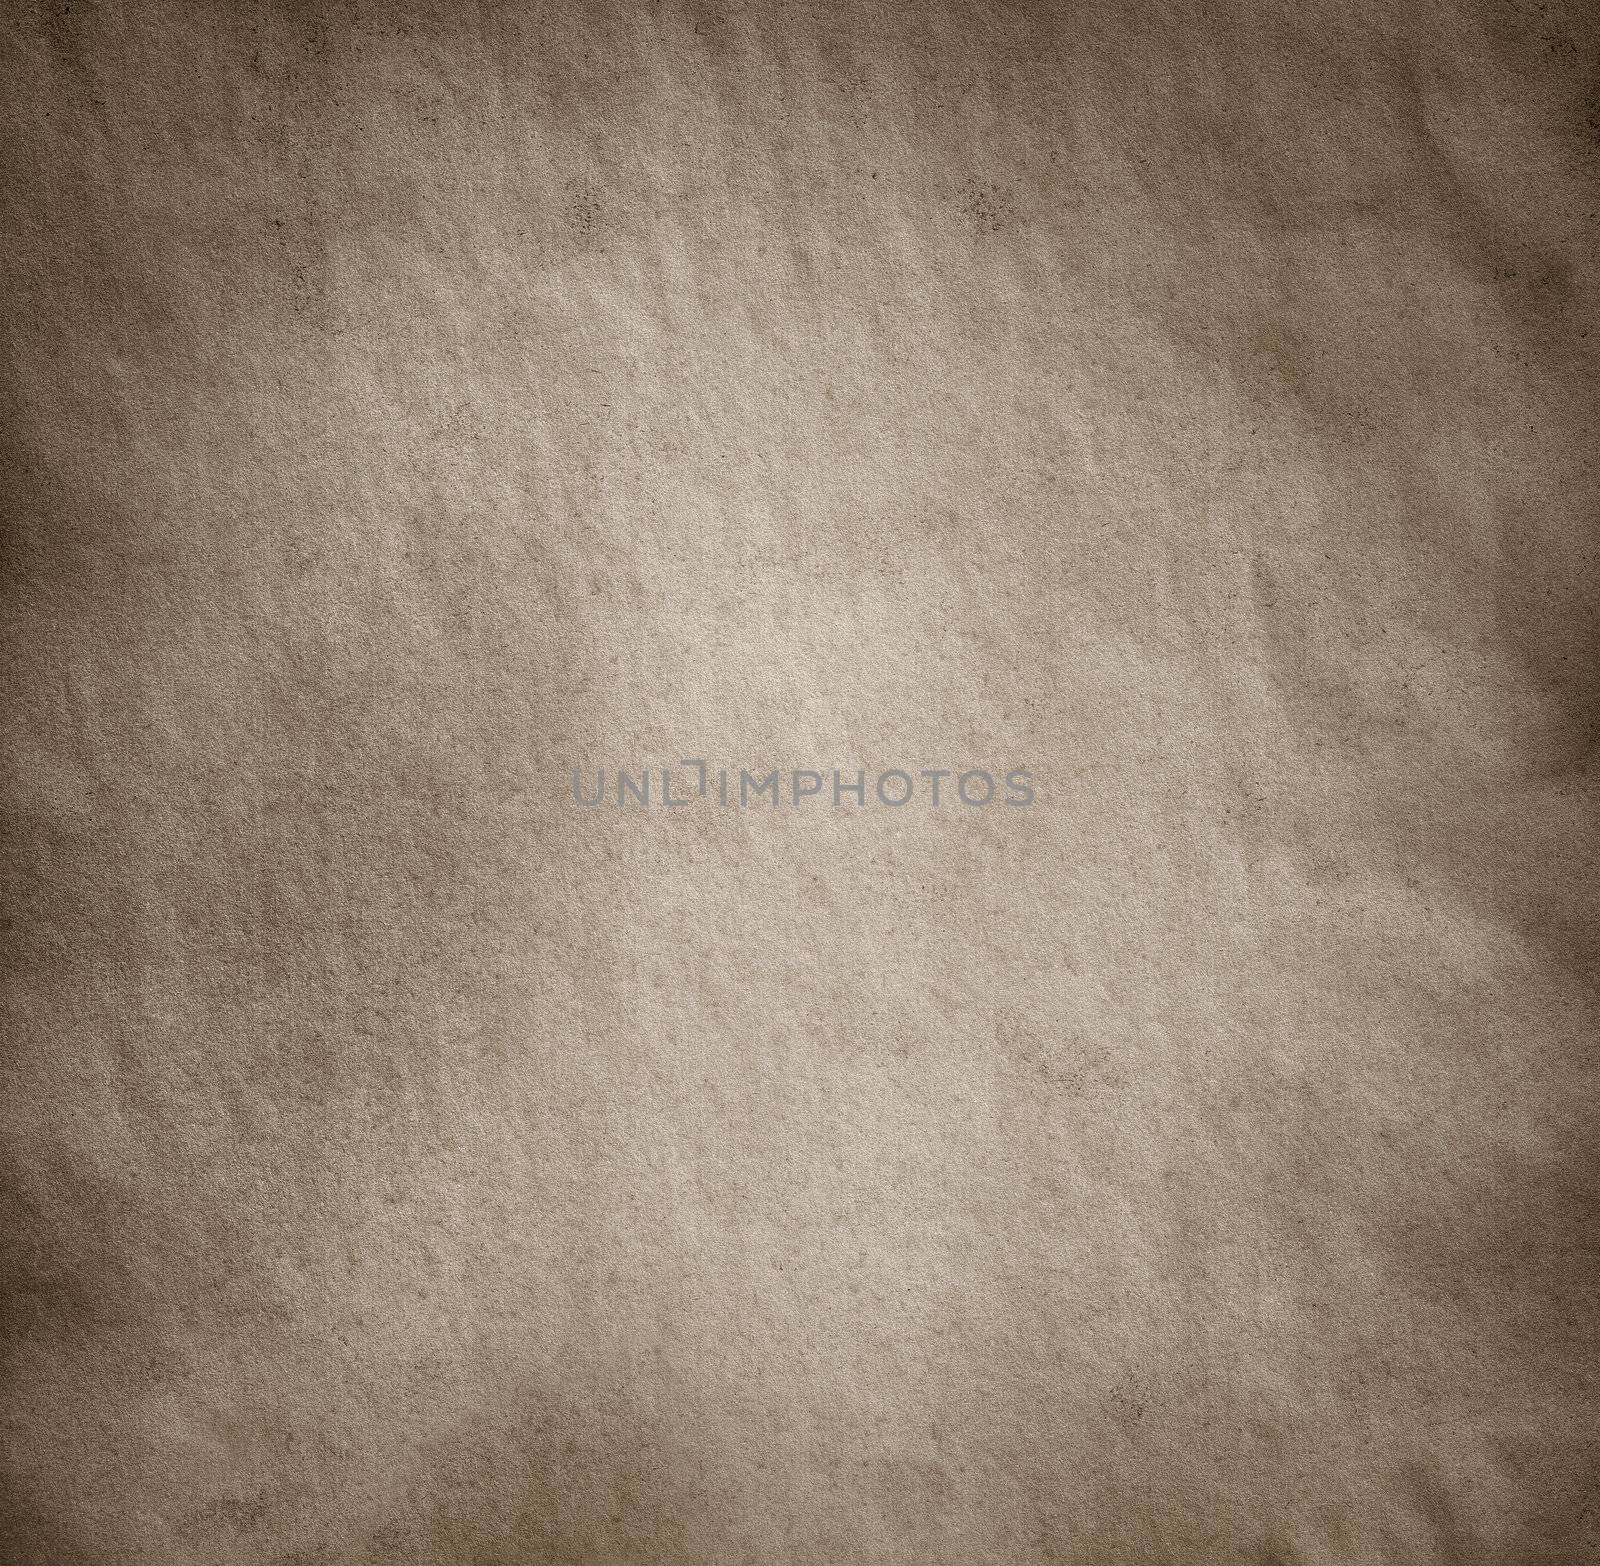 Grunge paper texture background with grainy effect and vignetting